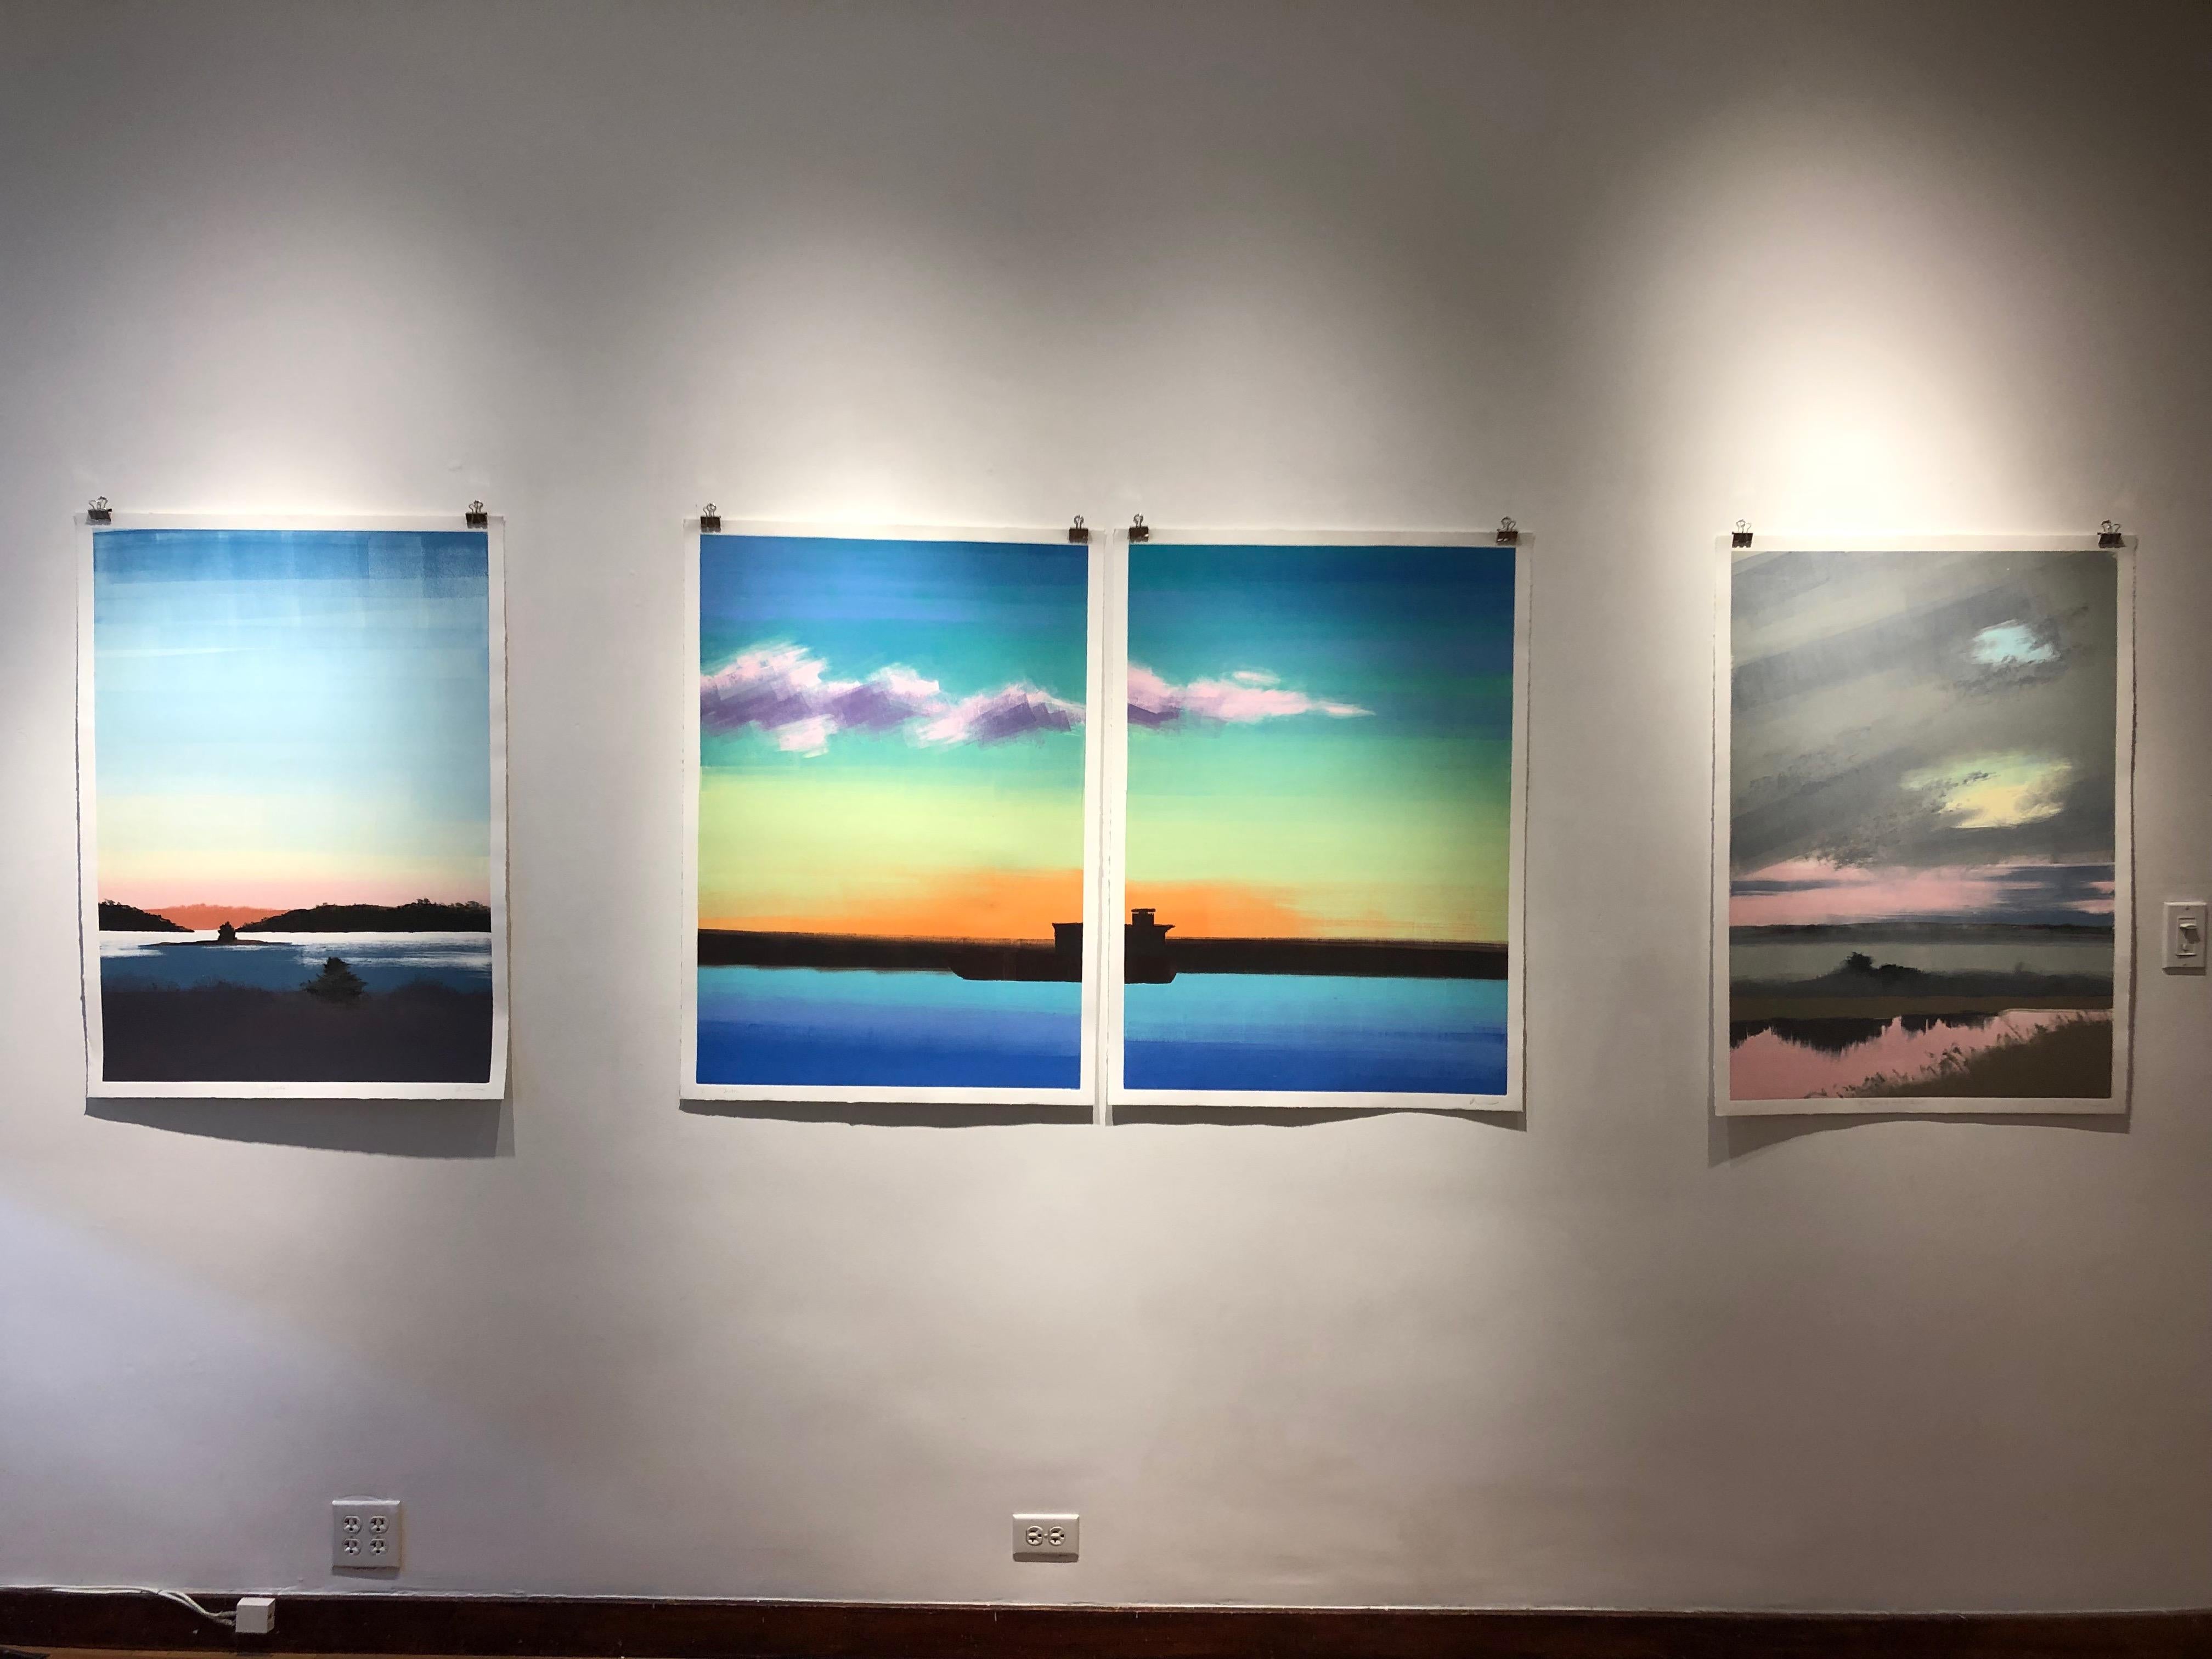 Tanker, vibrant print of ship against sunset, diptych - Print by Rachel Burgess